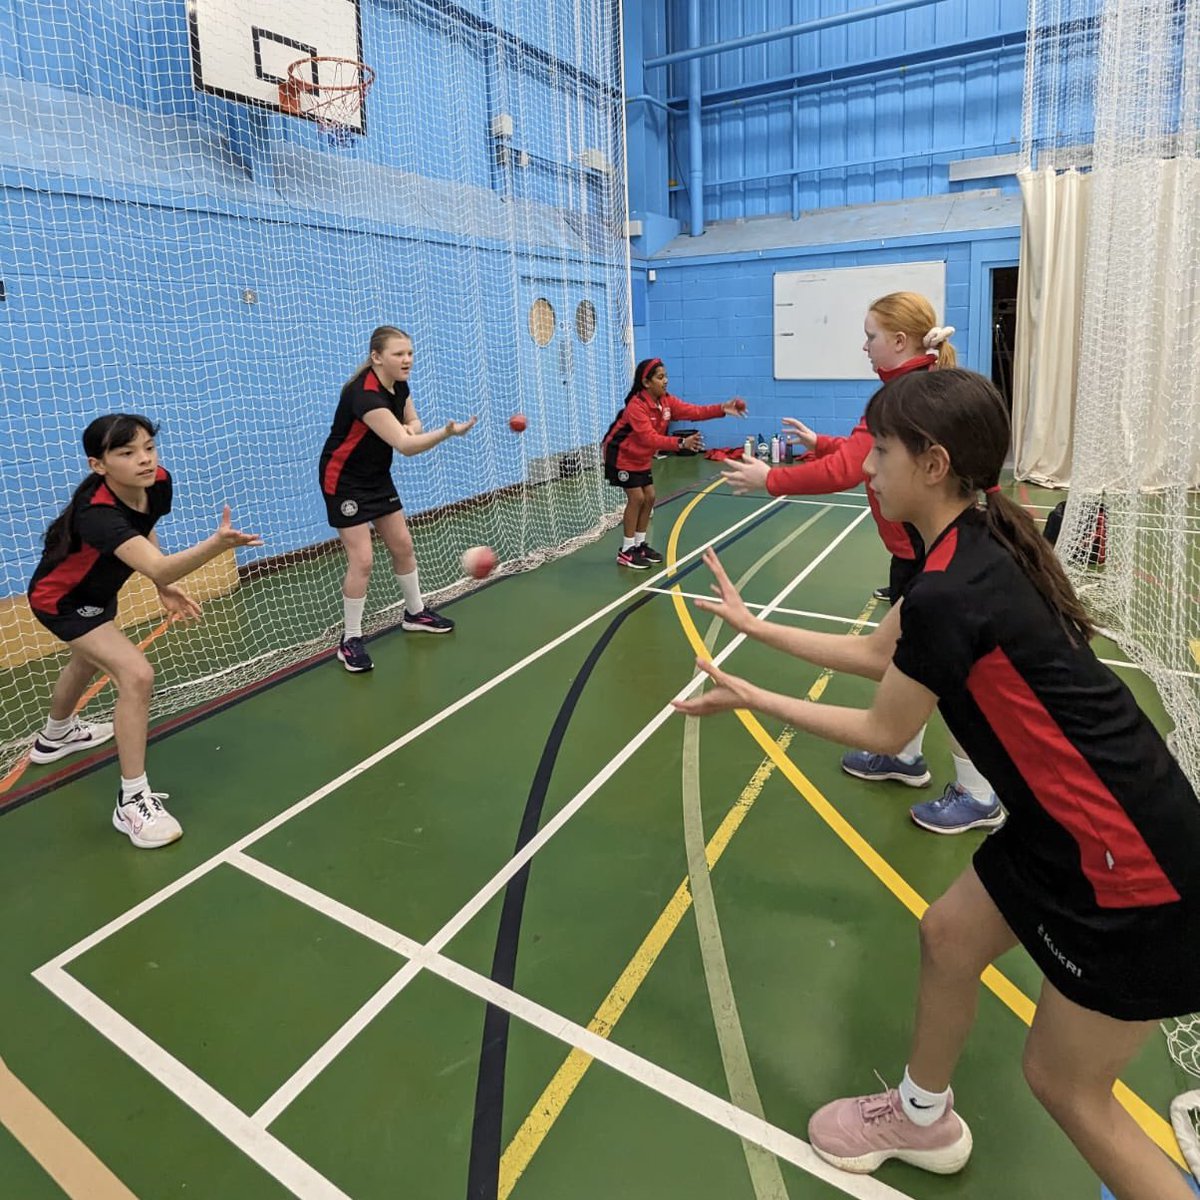 As we enter the Summer Term all girls and boys in Years 3 - 6 focus on cricket in their Games afternoons. We have so many keen cricketers, working hard to improve their skills under the watchful eye of our specialist PE teachers and cricket coaches. #nulssport #wearenuls